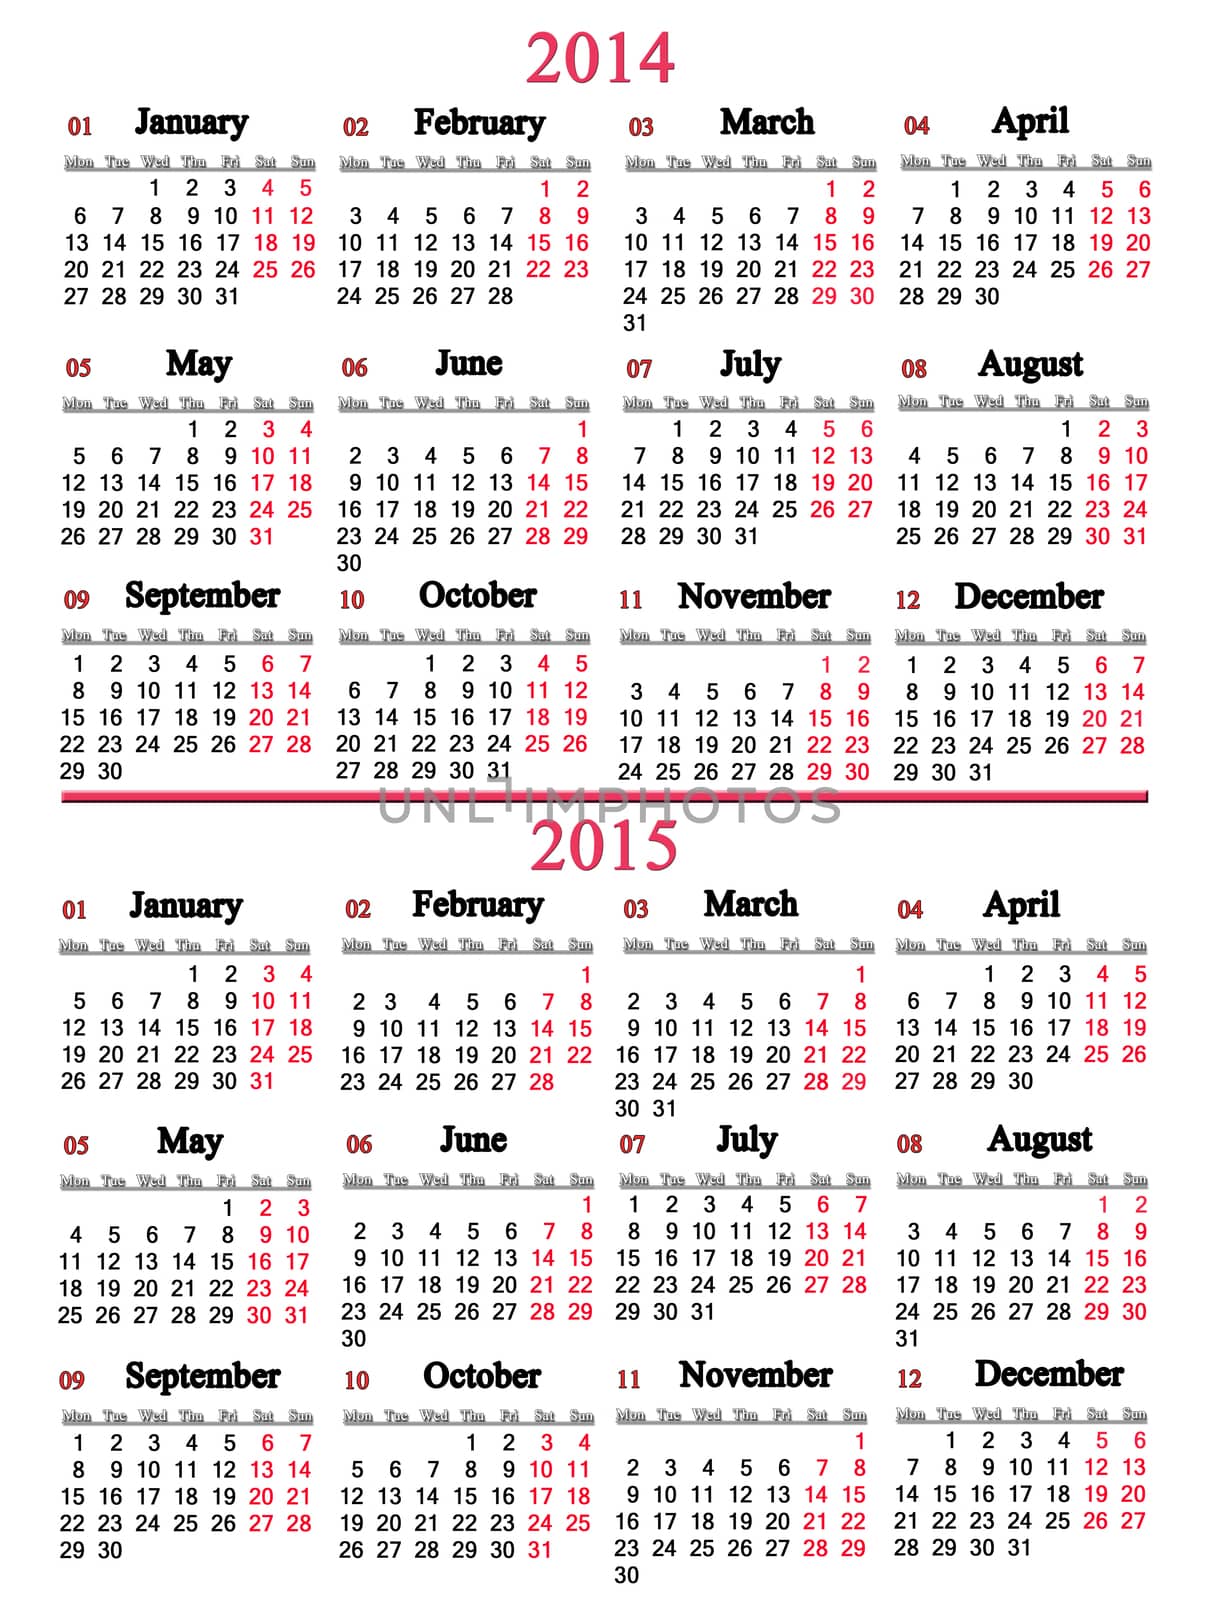 office calendar for 2014 - 2015 years on white background